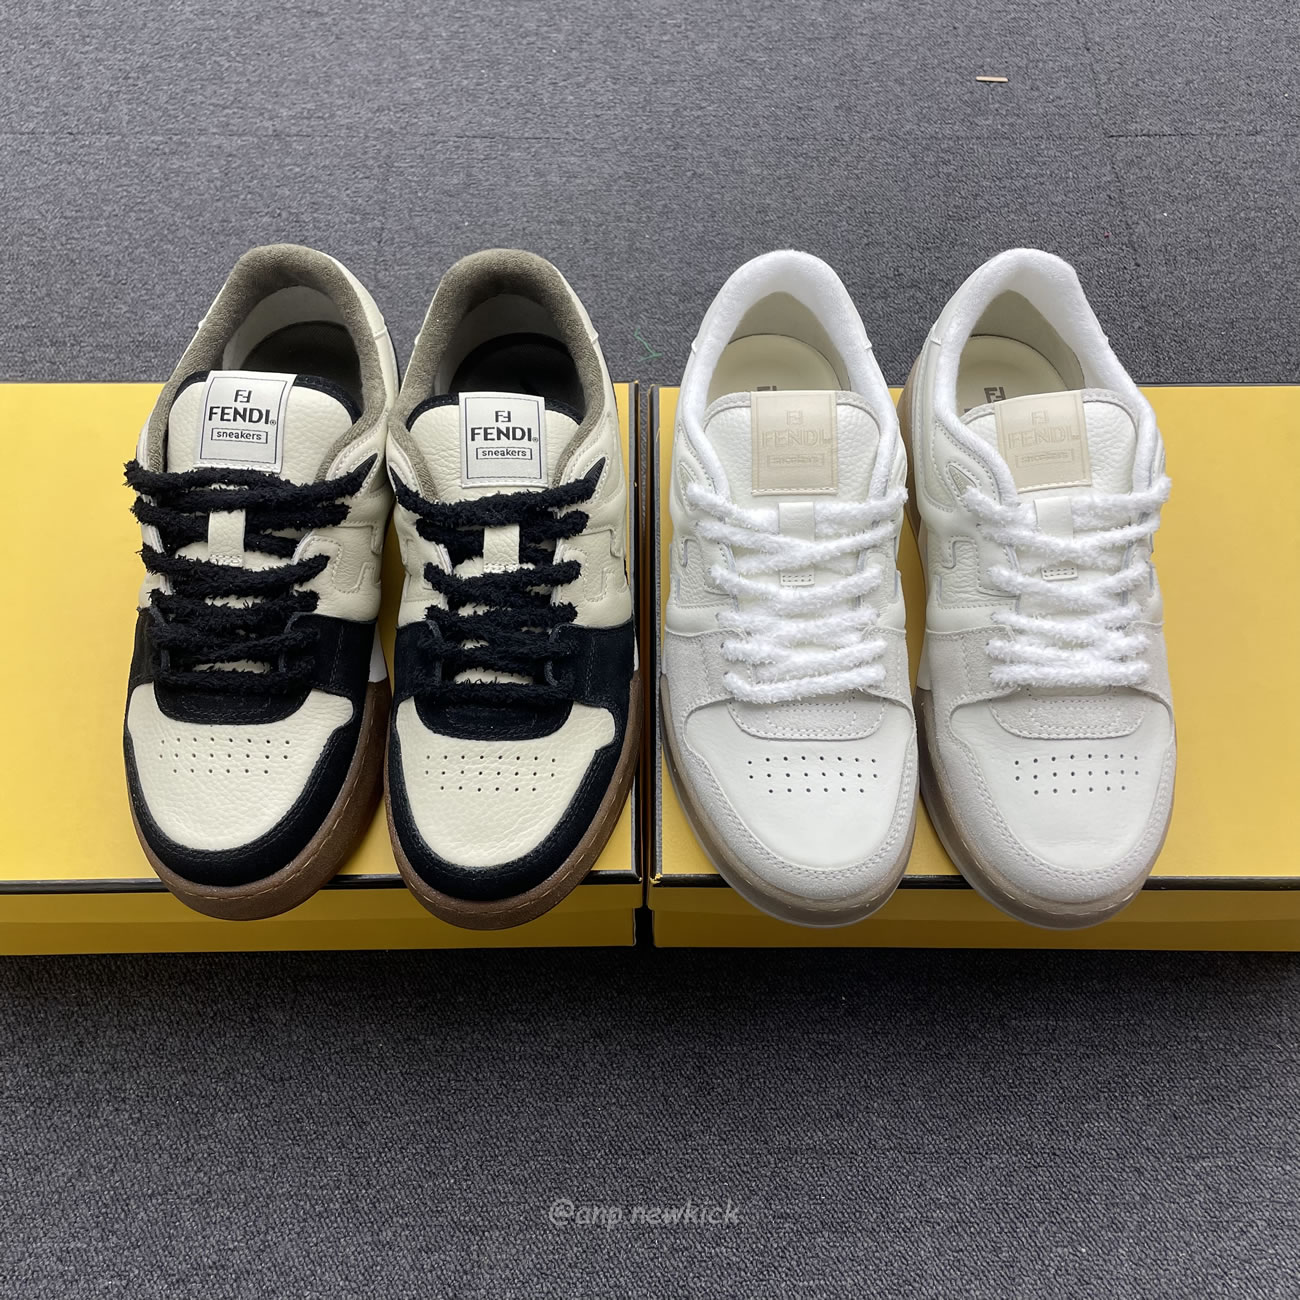 Fendi Match Cream Black White Suede And Leather Low Top Sneakers (7) - newkick.org